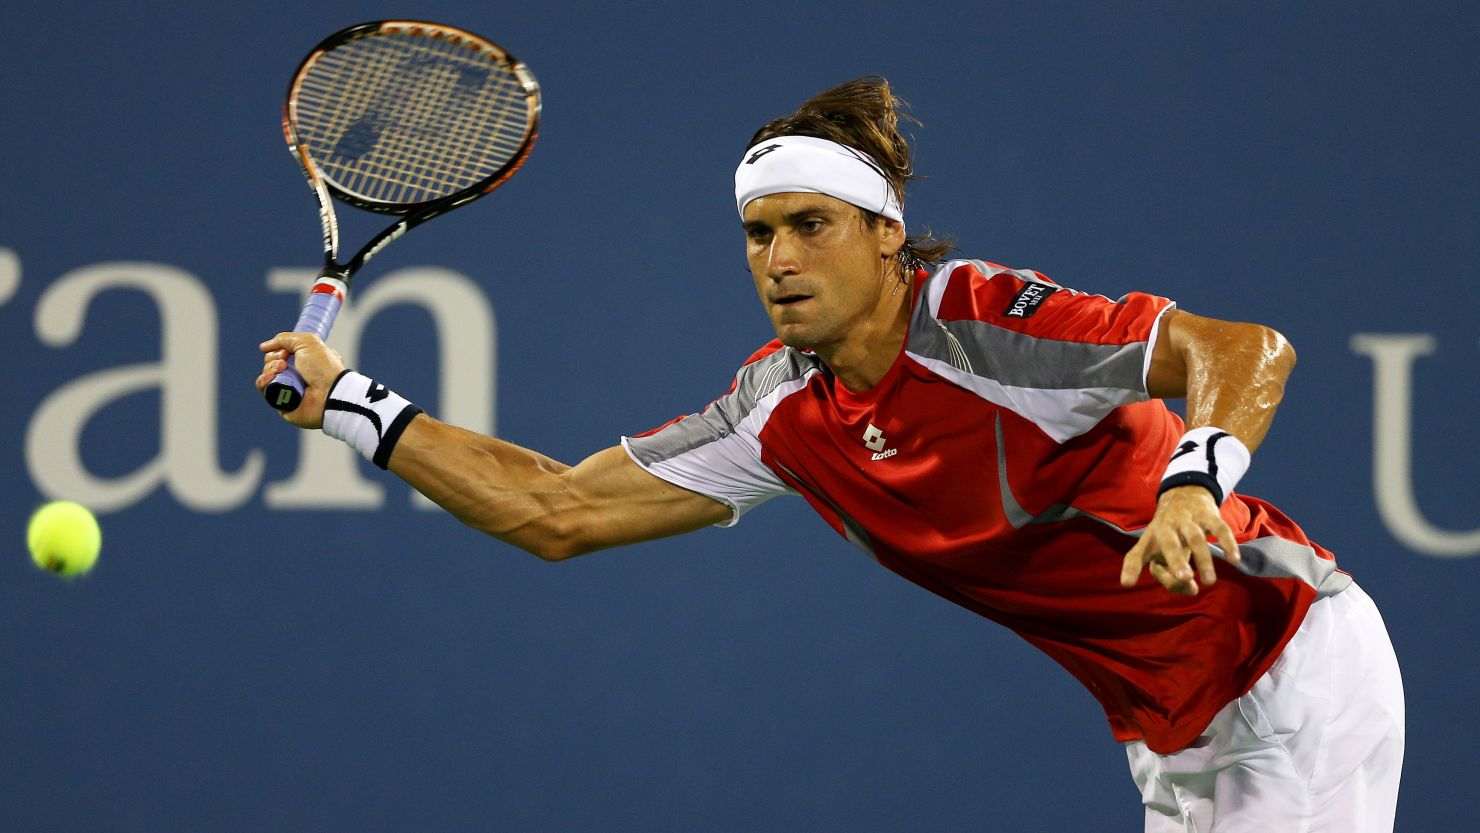 David Ferrer of Spain returns a shot against Richard Gasquet during their fourth-round match on day nine of the 2012 U.S. Open.